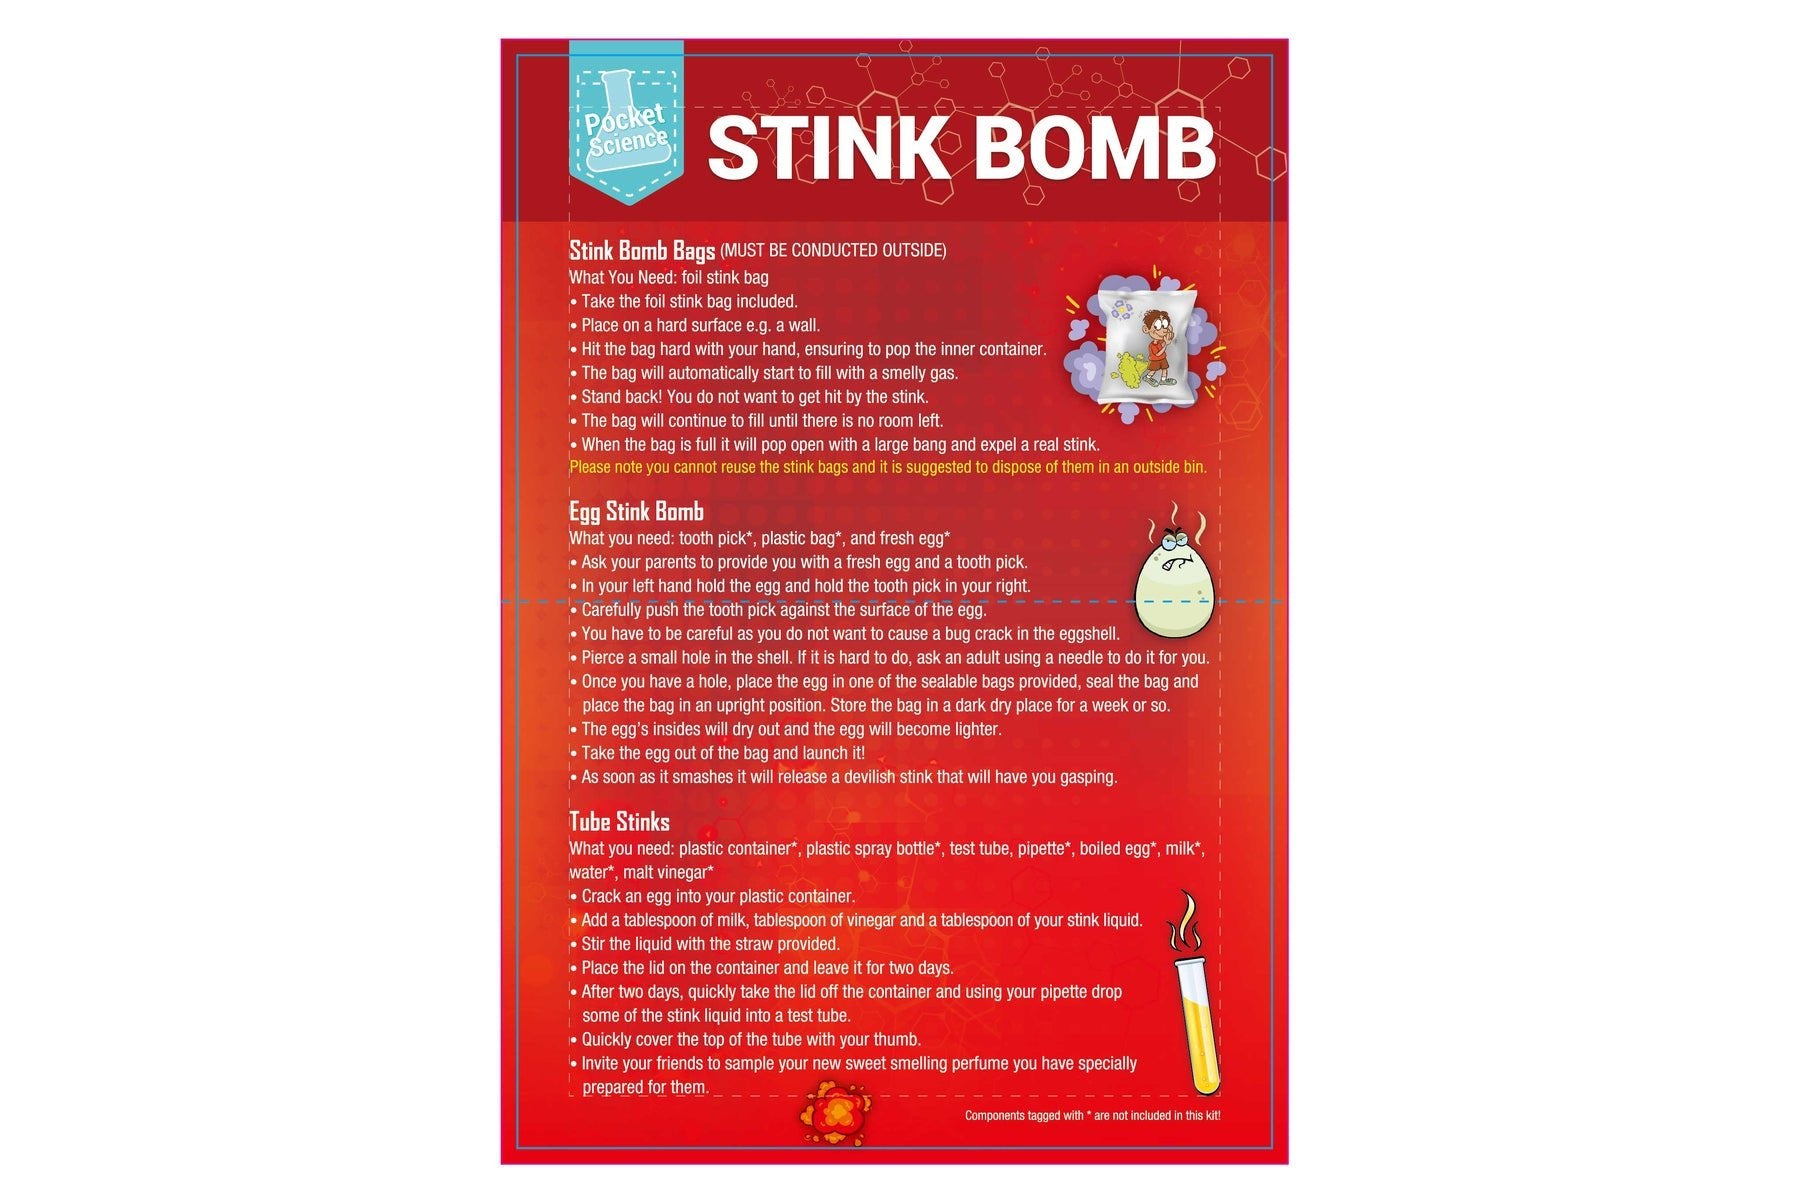 Step-by-Step Stink Bomb Instructions